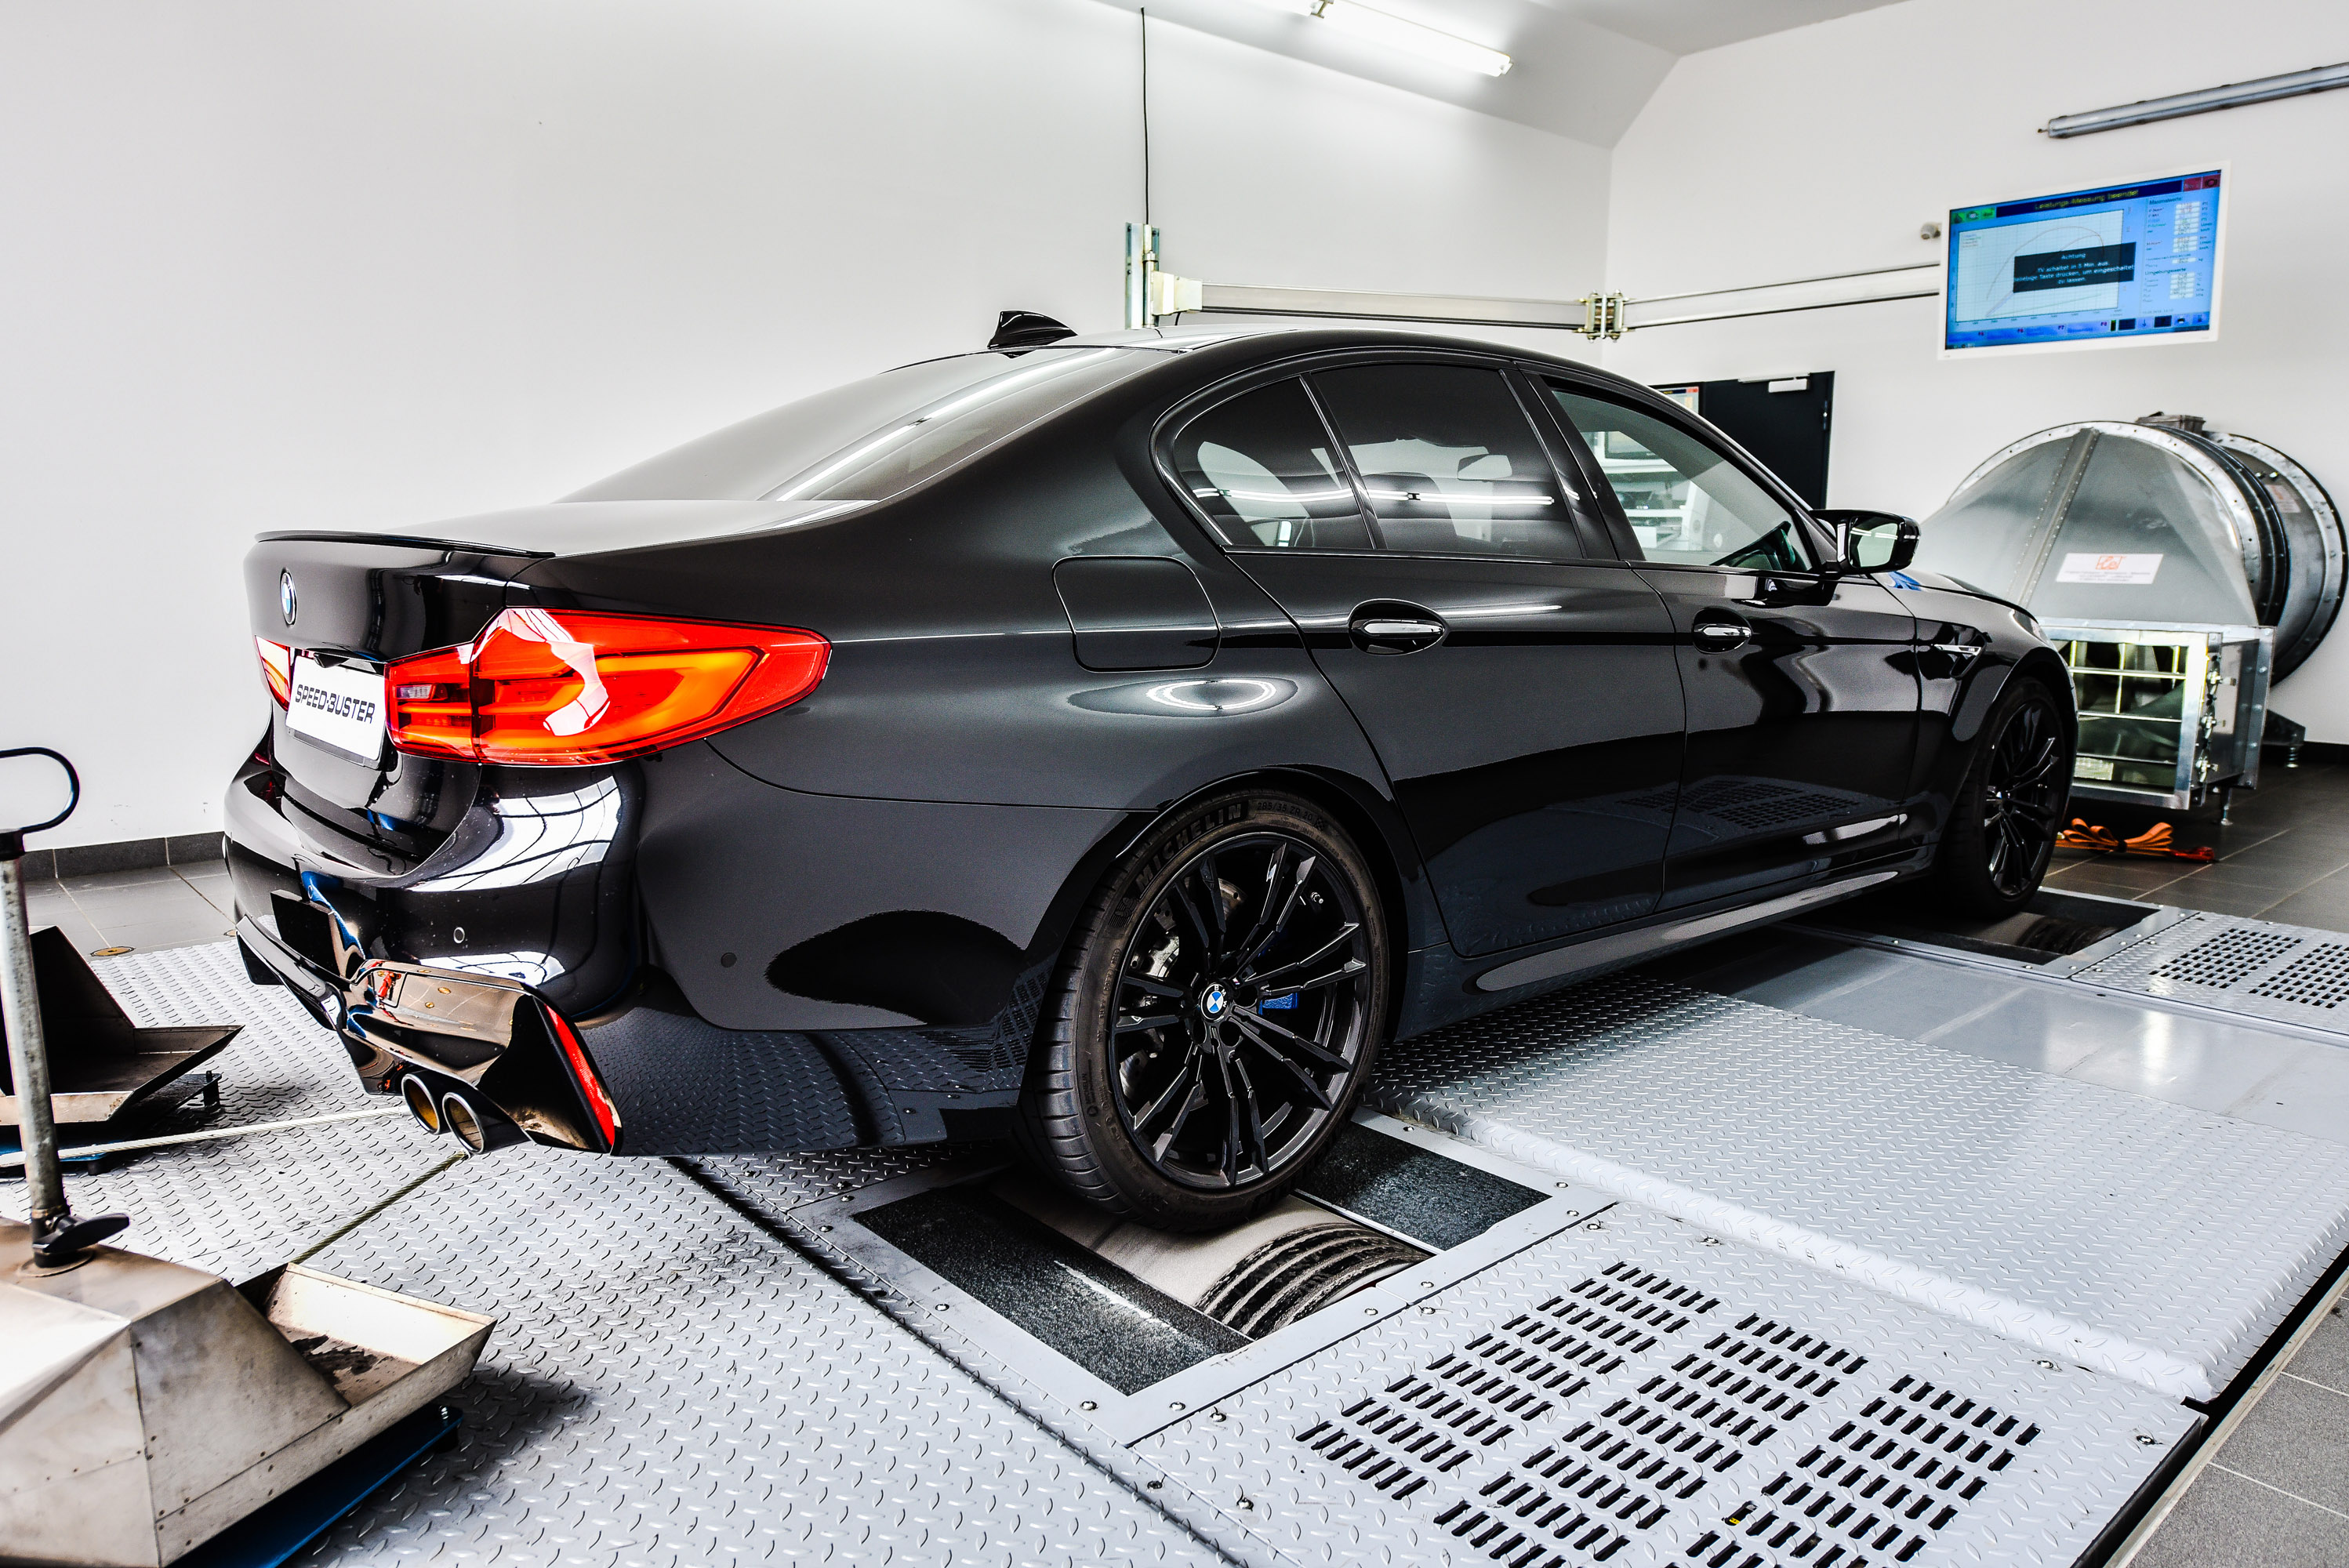 Speed-Buster BMW M5 F90